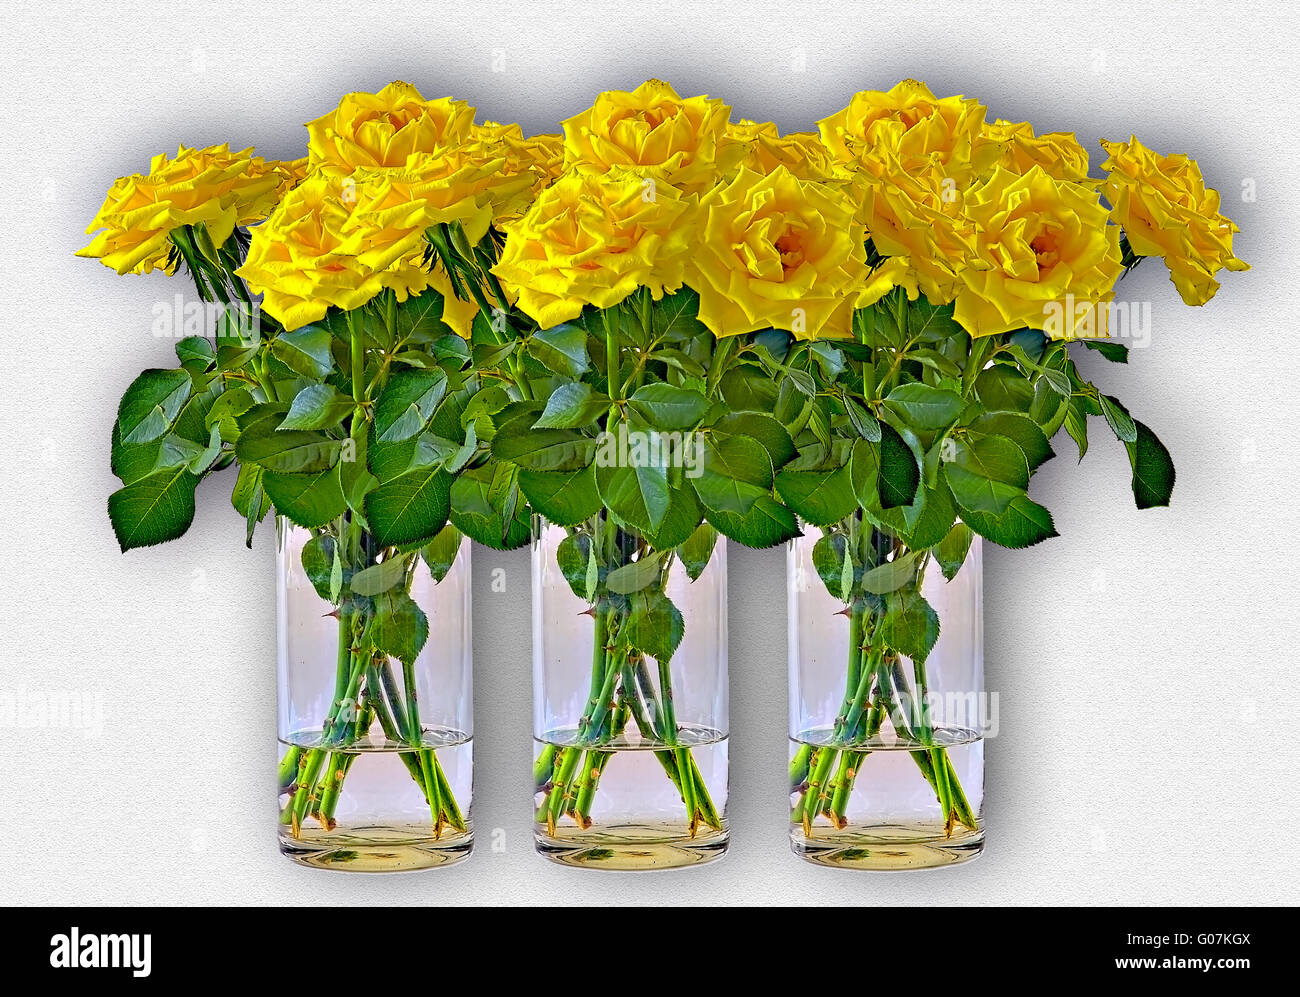 Three bunches of yellow roses in vases of glass Stock Photo